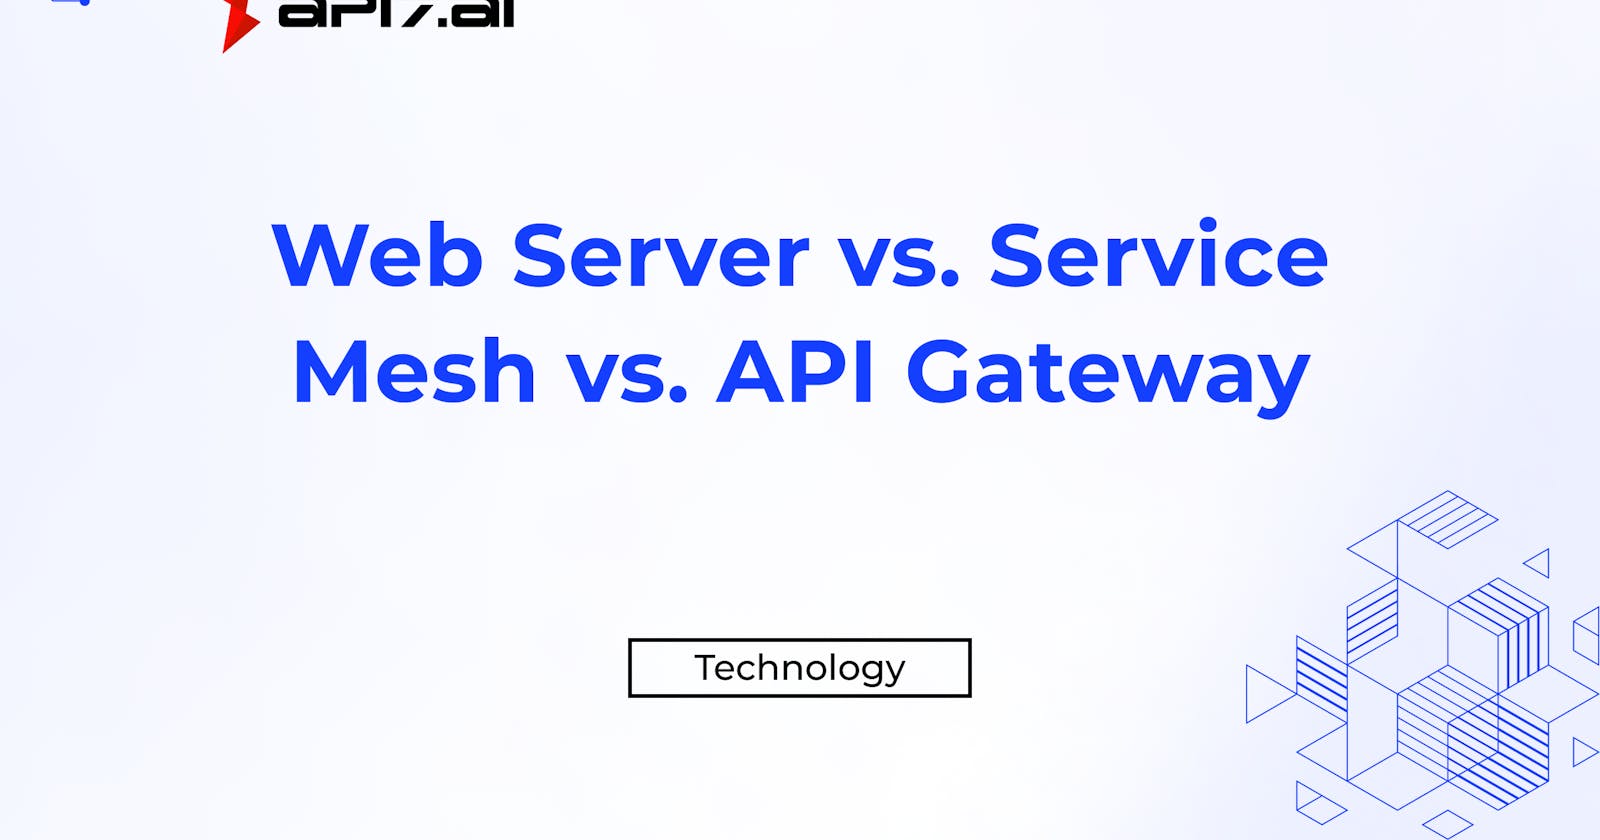 Web Server vs. Service Mesh vs. API Gateway: Which One is Right for You?